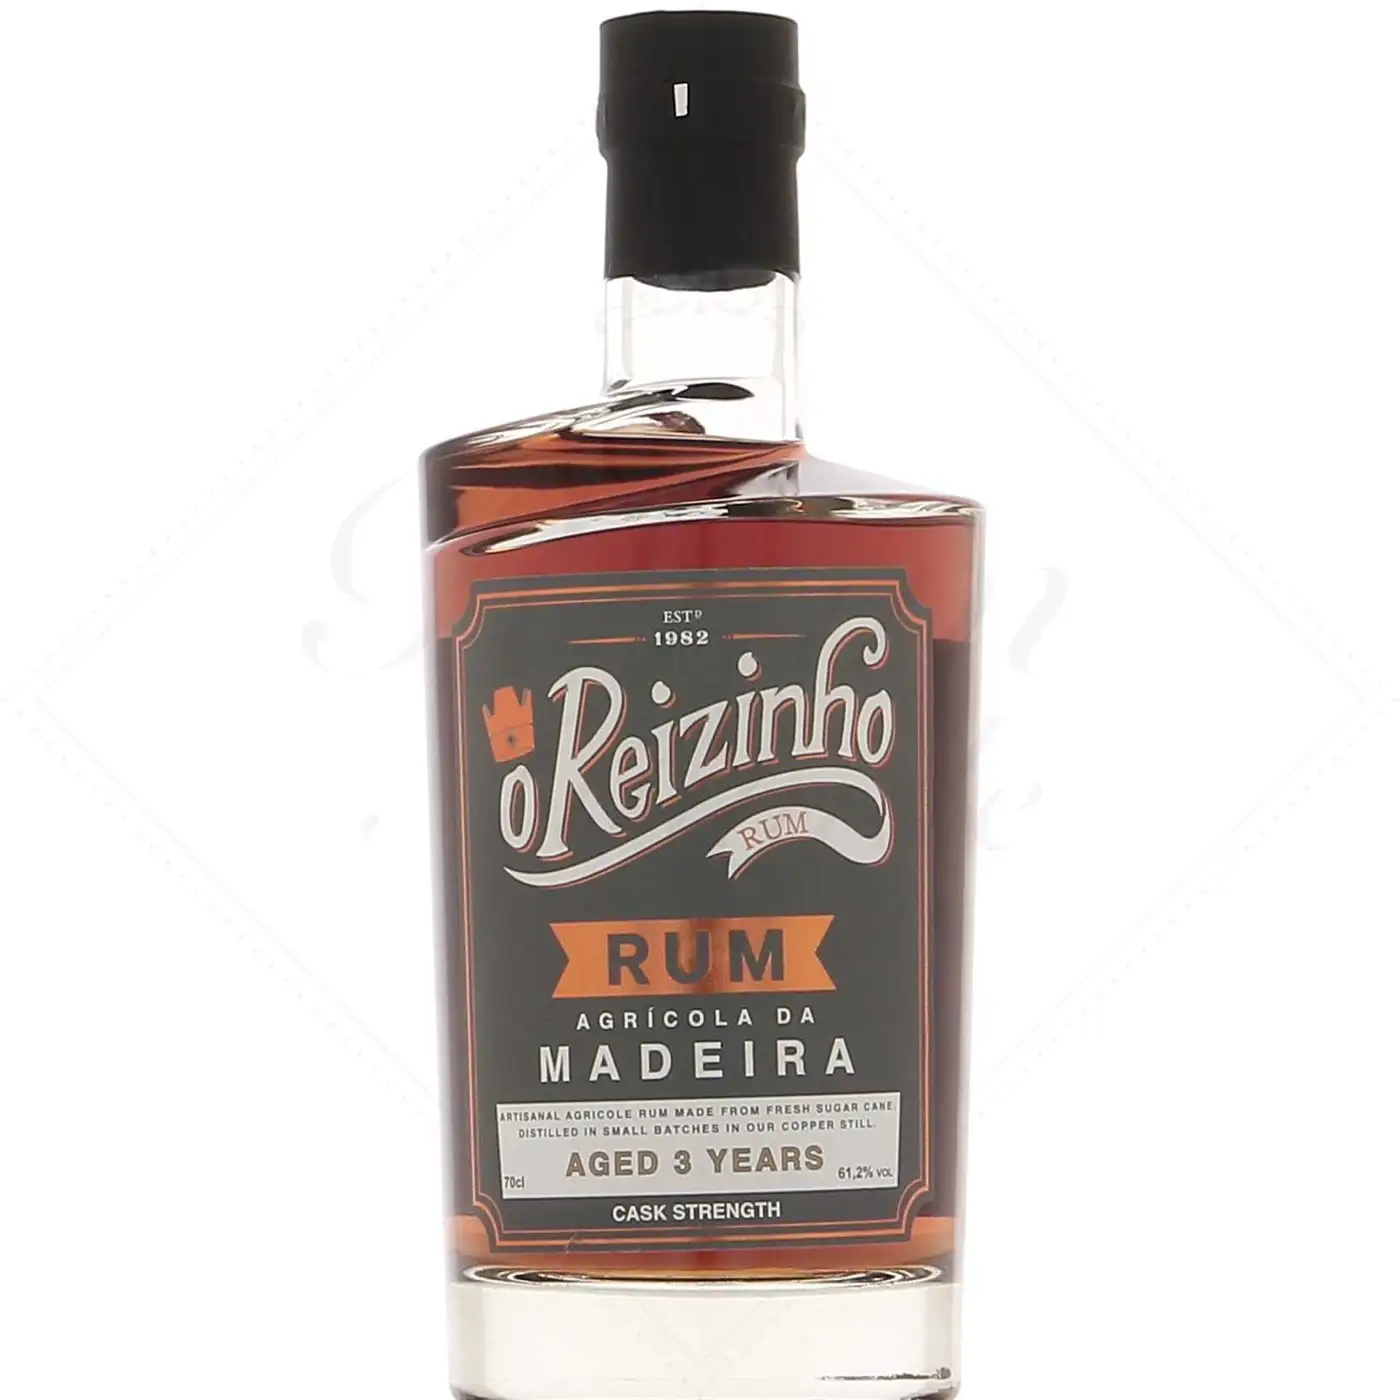 Image of the front of the bottle of the rum Aged 3 Years